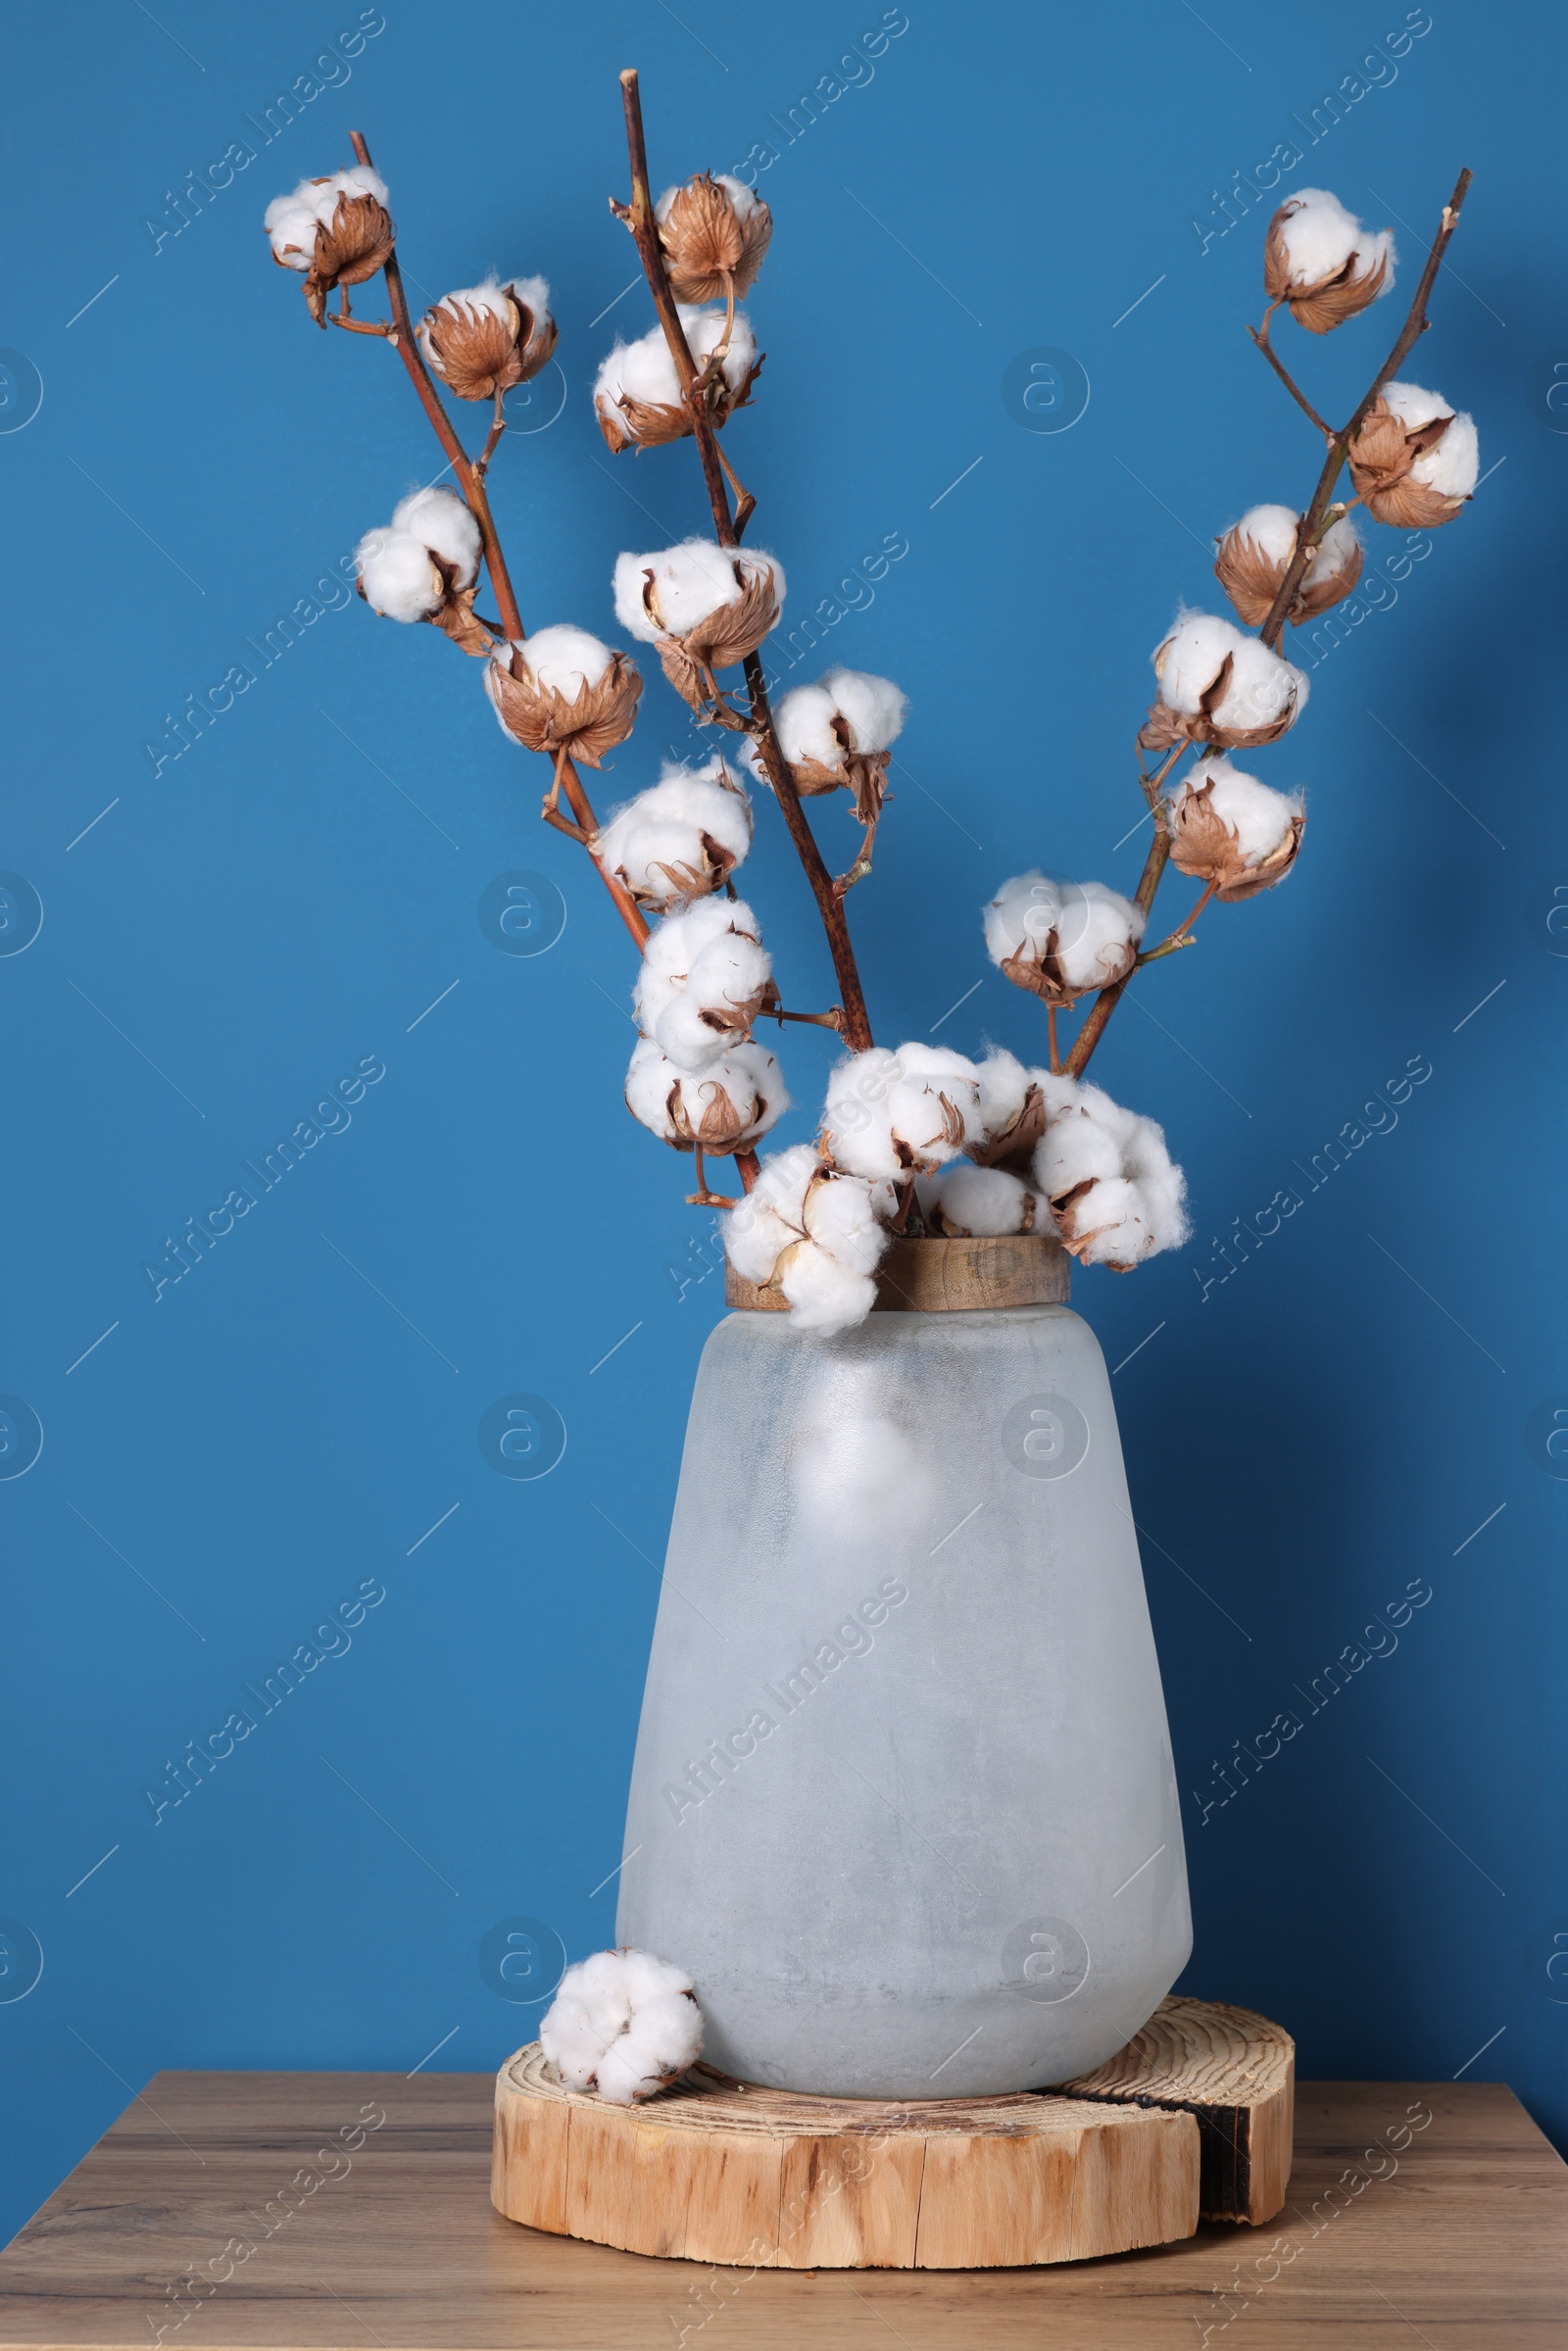 Photo of Cotton branches with fluffy flowers in vase on wooden table against light blue background